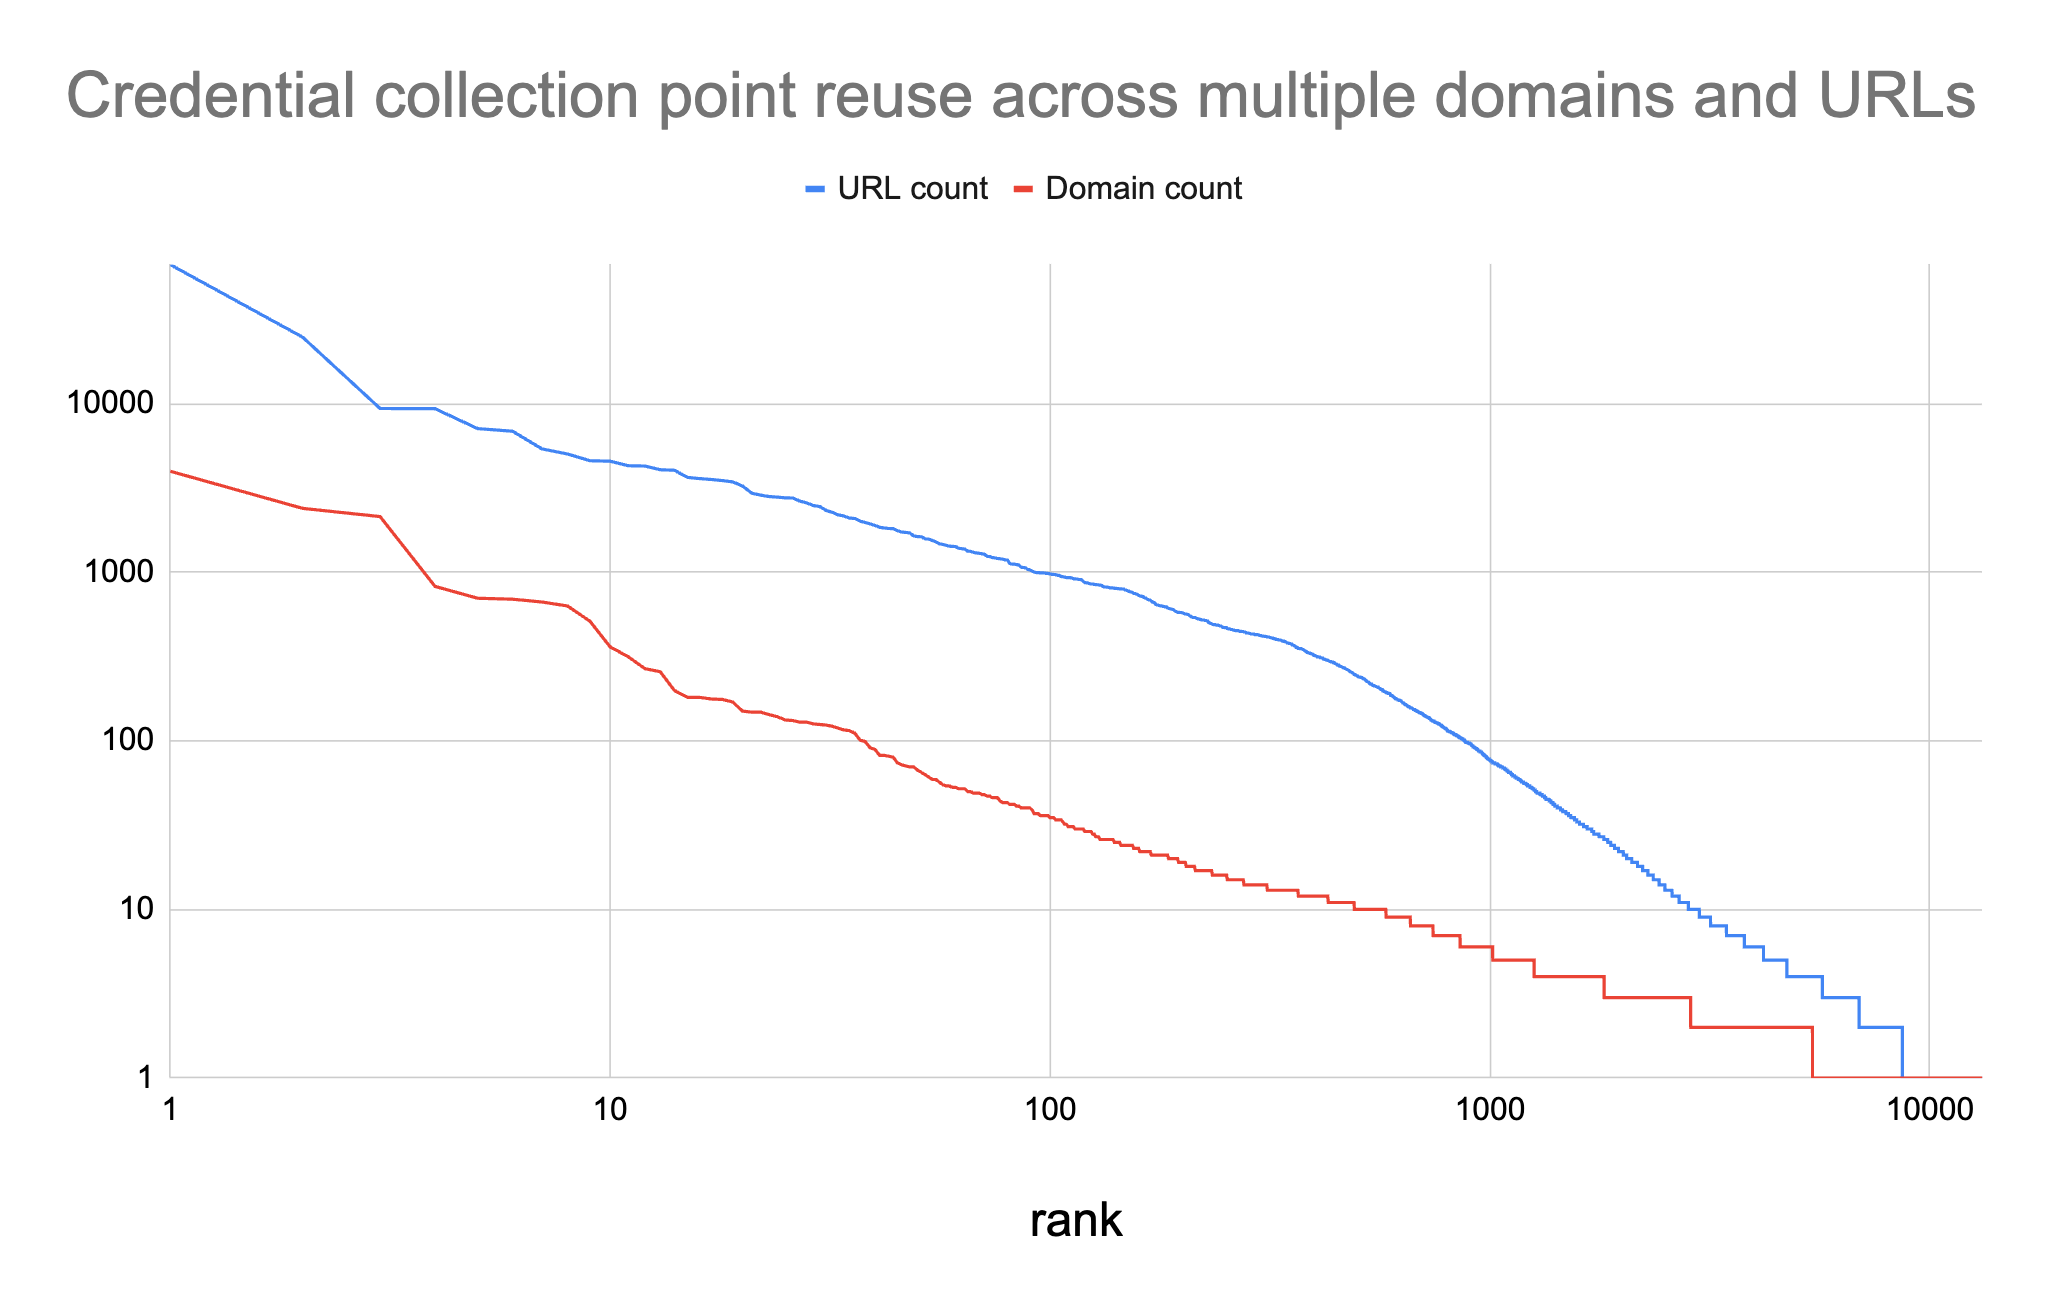 Image 1 is a line chart comparing URL count in blue to domain count in red by rank. The URL count has a higher count than the domain count. 